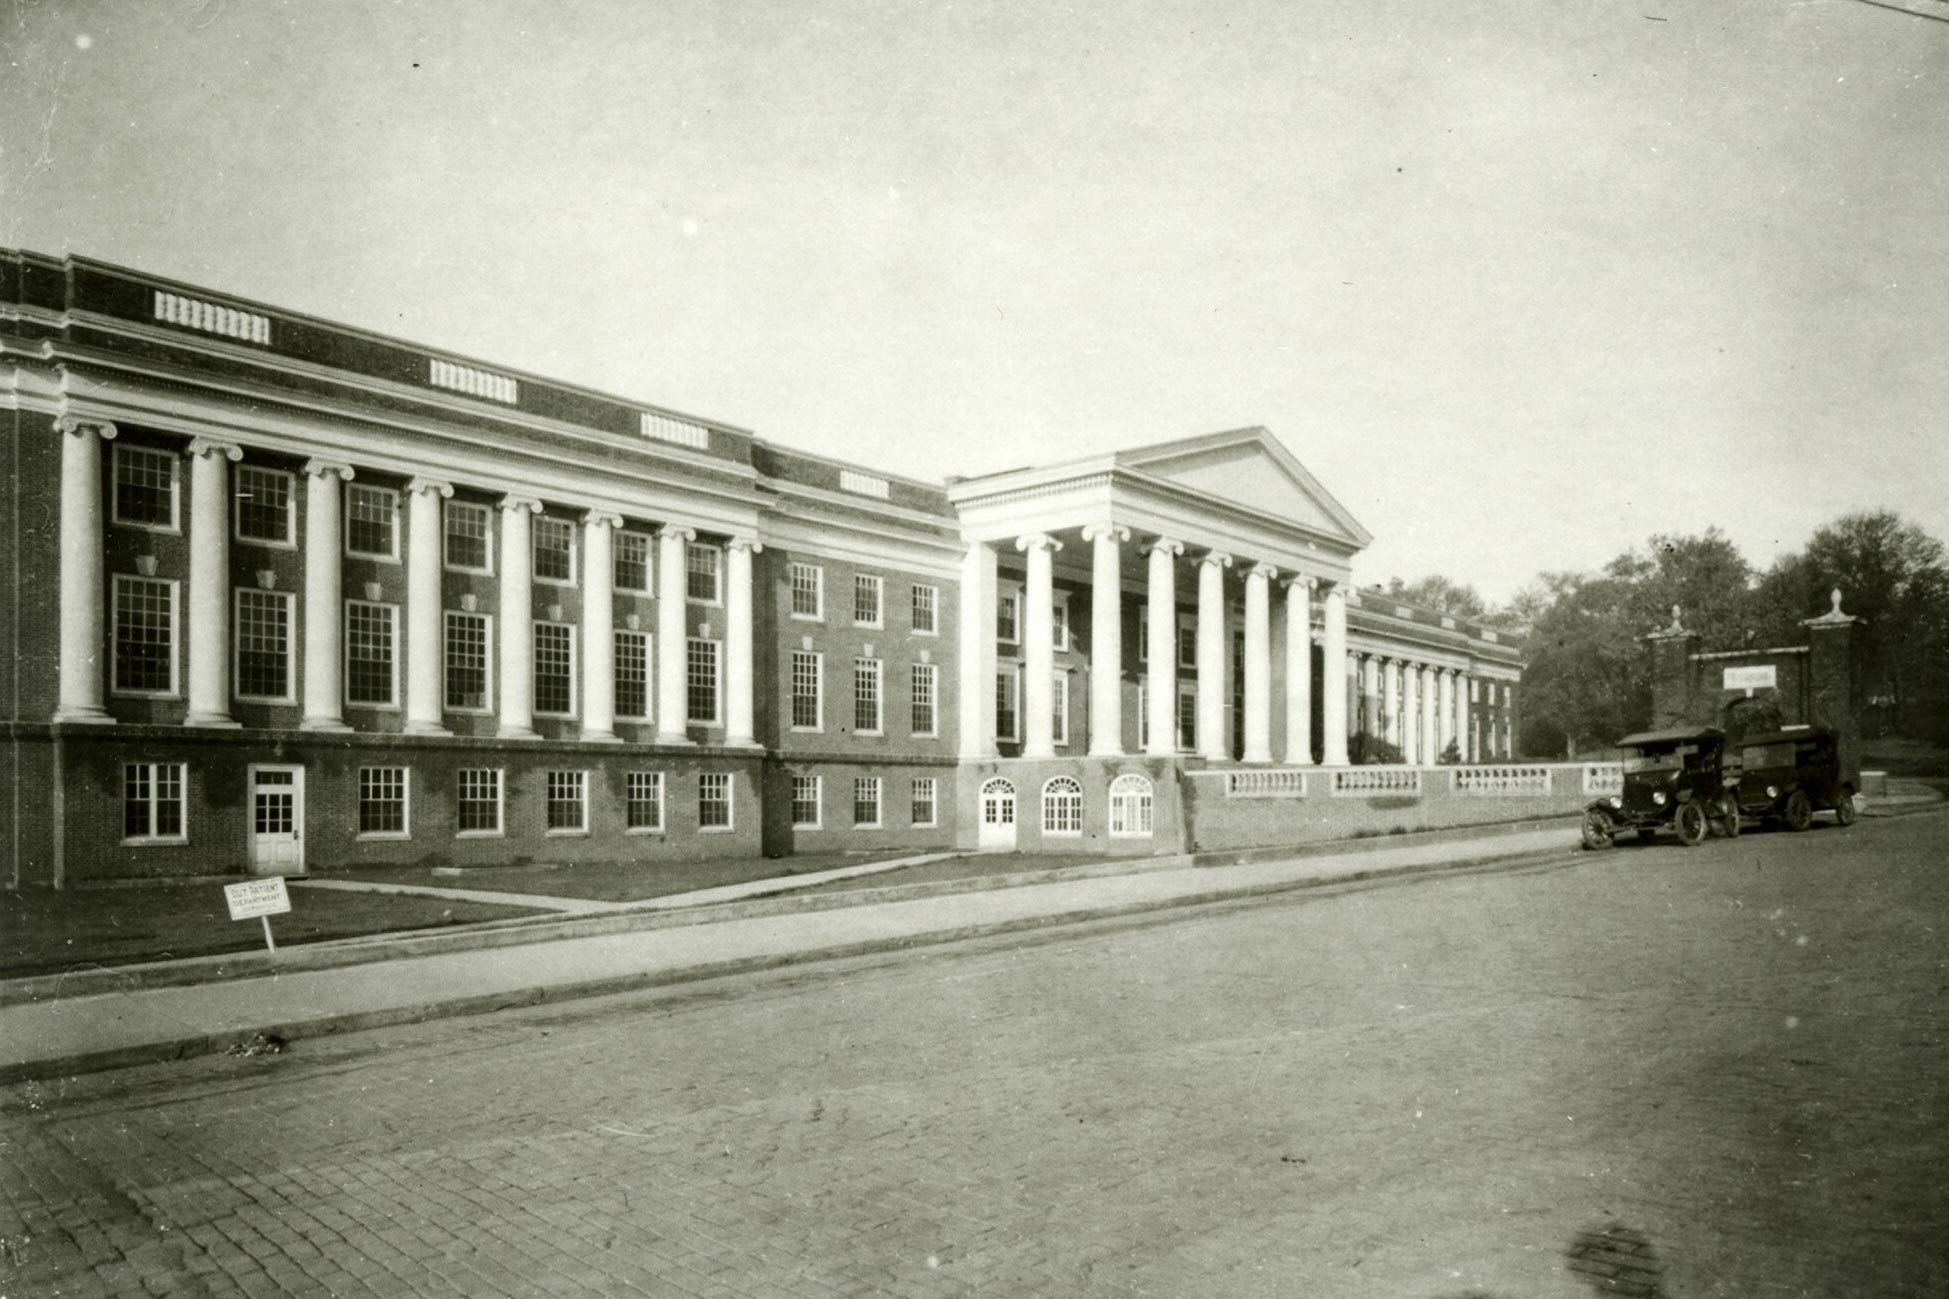 Black and white image of the School of Medicine building in 1929